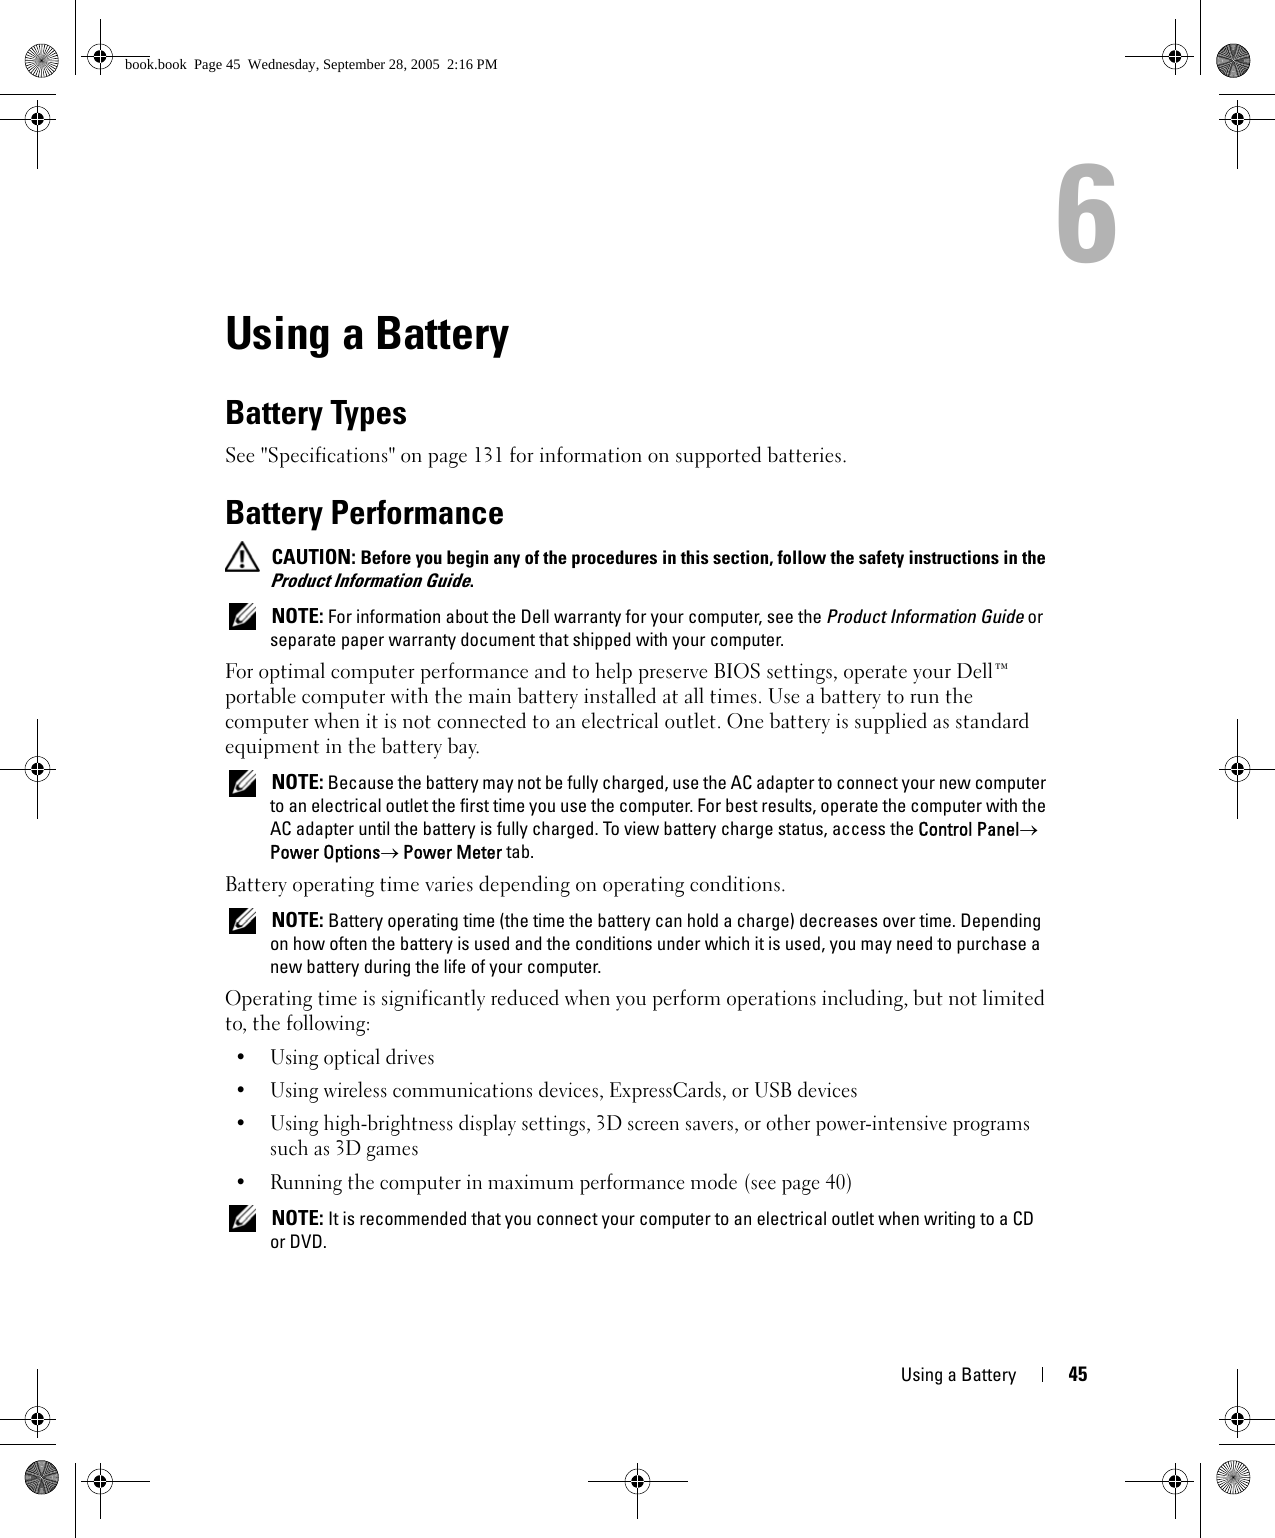 Using a Battery 456Using a BatteryBattery TypesSee &quot;Specifications&quot; on page 131 for information on supported batteries.Battery Performance CAUTION: Before you begin any of the procedures in this section, follow the safety instructions in the Product Information Guide. NOTE: For information about the Dell warranty for your computer, see the Product Information Guide or separate paper warranty document that shipped with your computer.For optimal computer performance and to help preserve BIOS settings, operate your Dell™ portable computer with the main battery installed at all times. Use a battery to run the computer when it is not connected to an electrical outlet. One battery is supplied as standard equipment in the battery bay. NOTE: Because the battery may not be fully charged, use the AC adapter to connect your new computer to an electrical outlet the first time you use the computer. For best results, operate the computer with the AC adapter until the battery is fully charged. To view battery charge status, access the Control Panel→ Power Options→ Power Meter tab.Battery operating time varies depending on operating conditions.  NOTE: Battery operating time (the time the battery can hold a charge) decreases over time. Depending on how often the battery is used and the conditions under which it is used, you may need to purchase a new battery during the life of your computer.Operating time is significantly reduced when you perform operations including, but not limited to, the following:•Using optical drives• Using wireless communications devices, ExpressCards, or USB devices• Using high-brightness display settings, 3D screen savers, or other power-intensive programs such as 3D games• Running the computer in maximum performance mode (see page 40) NOTE: It is recommended that you connect your computer to an electrical outlet when writing to a CD or DVD.book.book  Page 45  Wednesday, September 28, 2005  2:16 PM